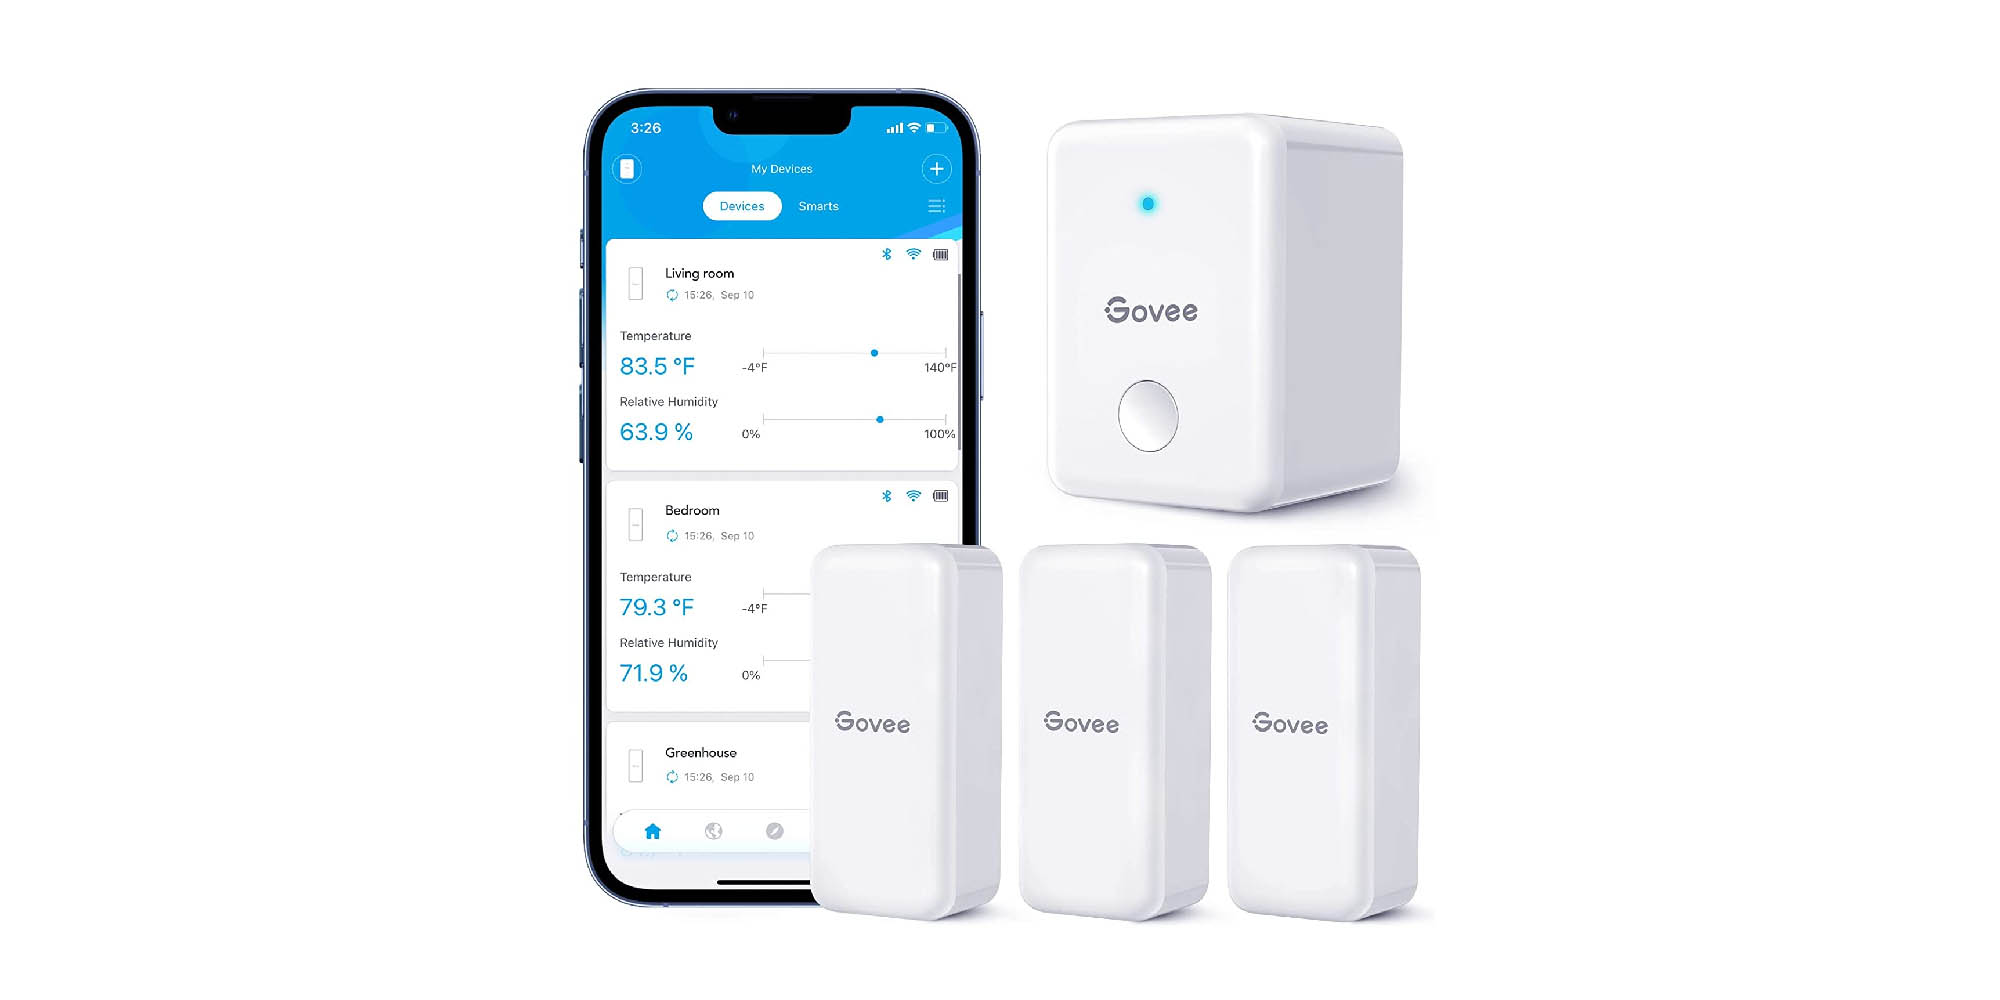 Govee, Other, Govee Wifi Hygrometer Thermometer Wireless Temperature  Humidity Sensor With App